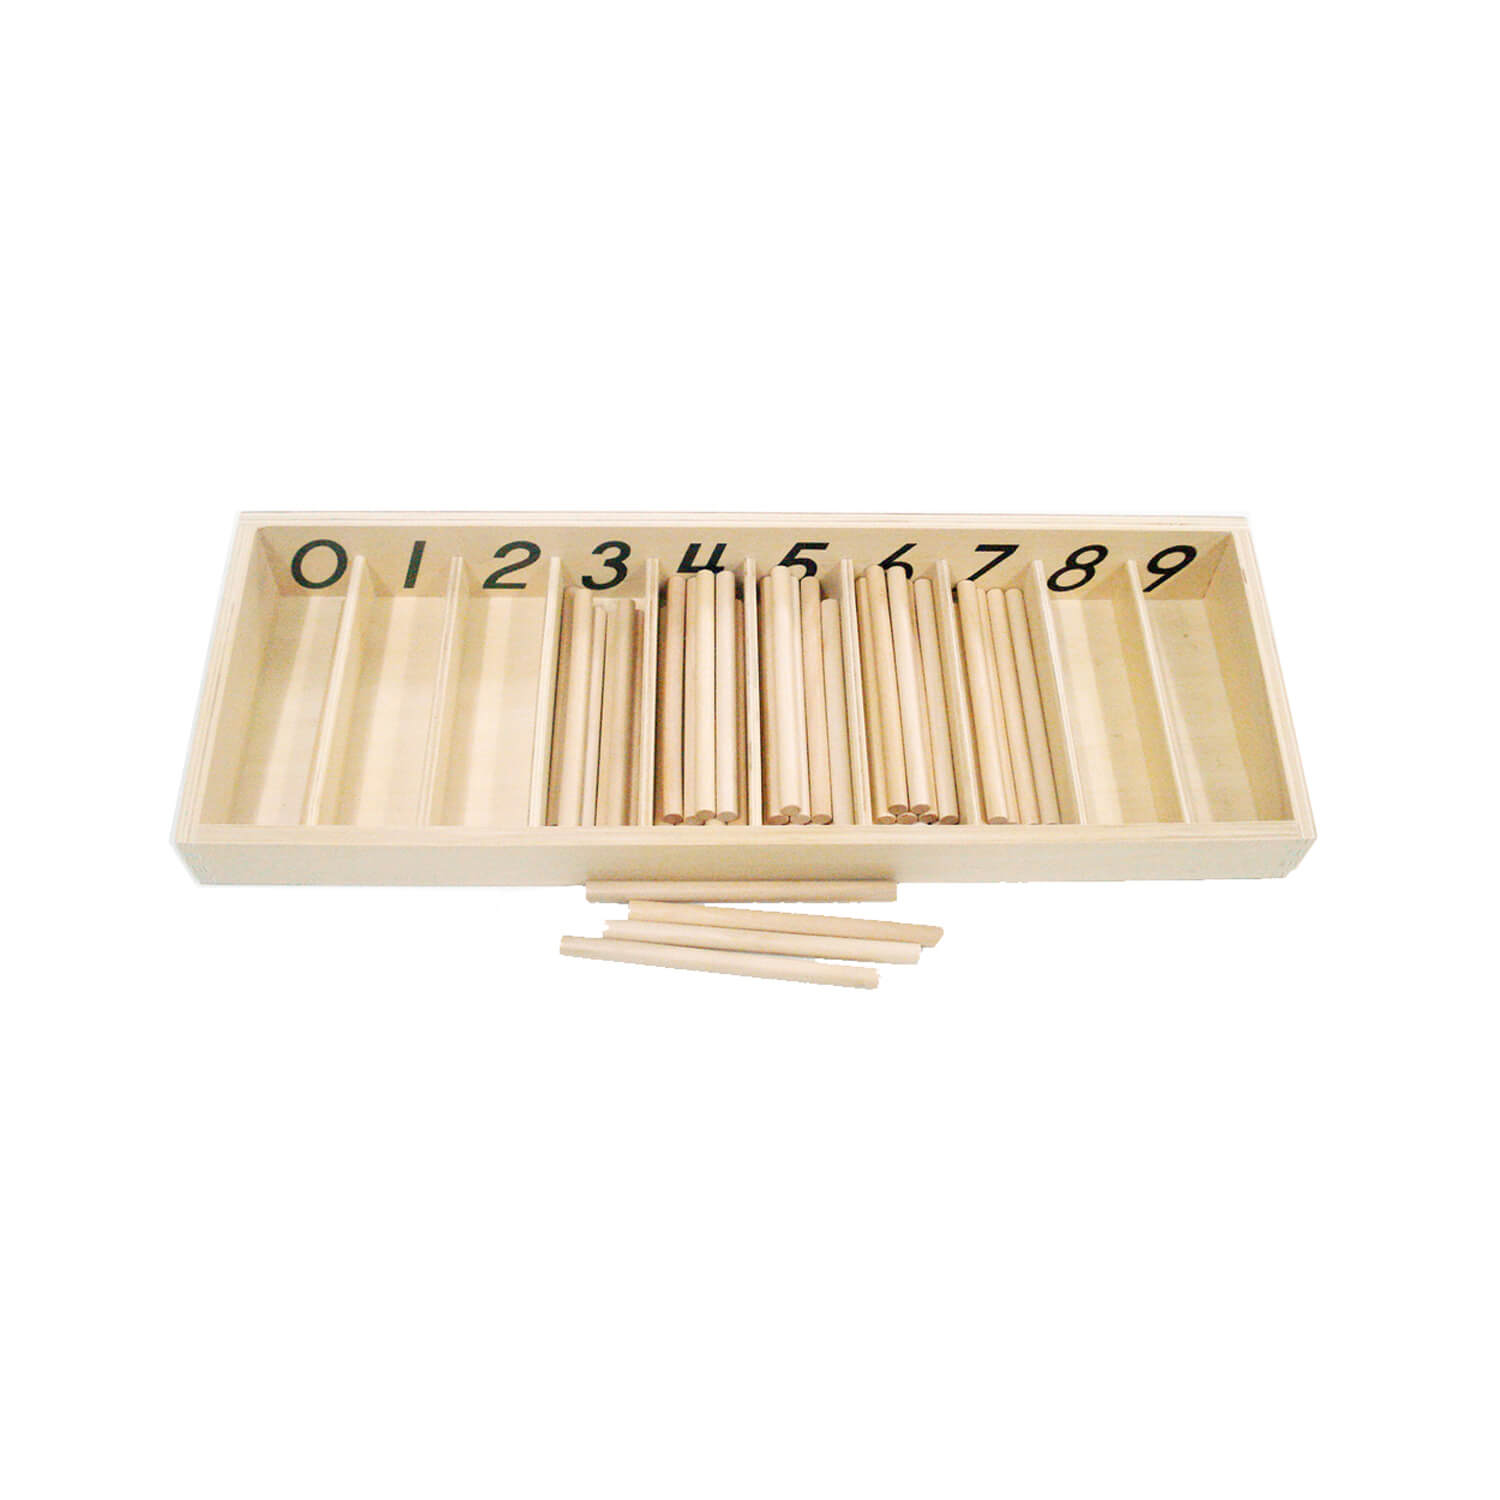 Spindle Box: Set of 45 Straight Spindles in A Box